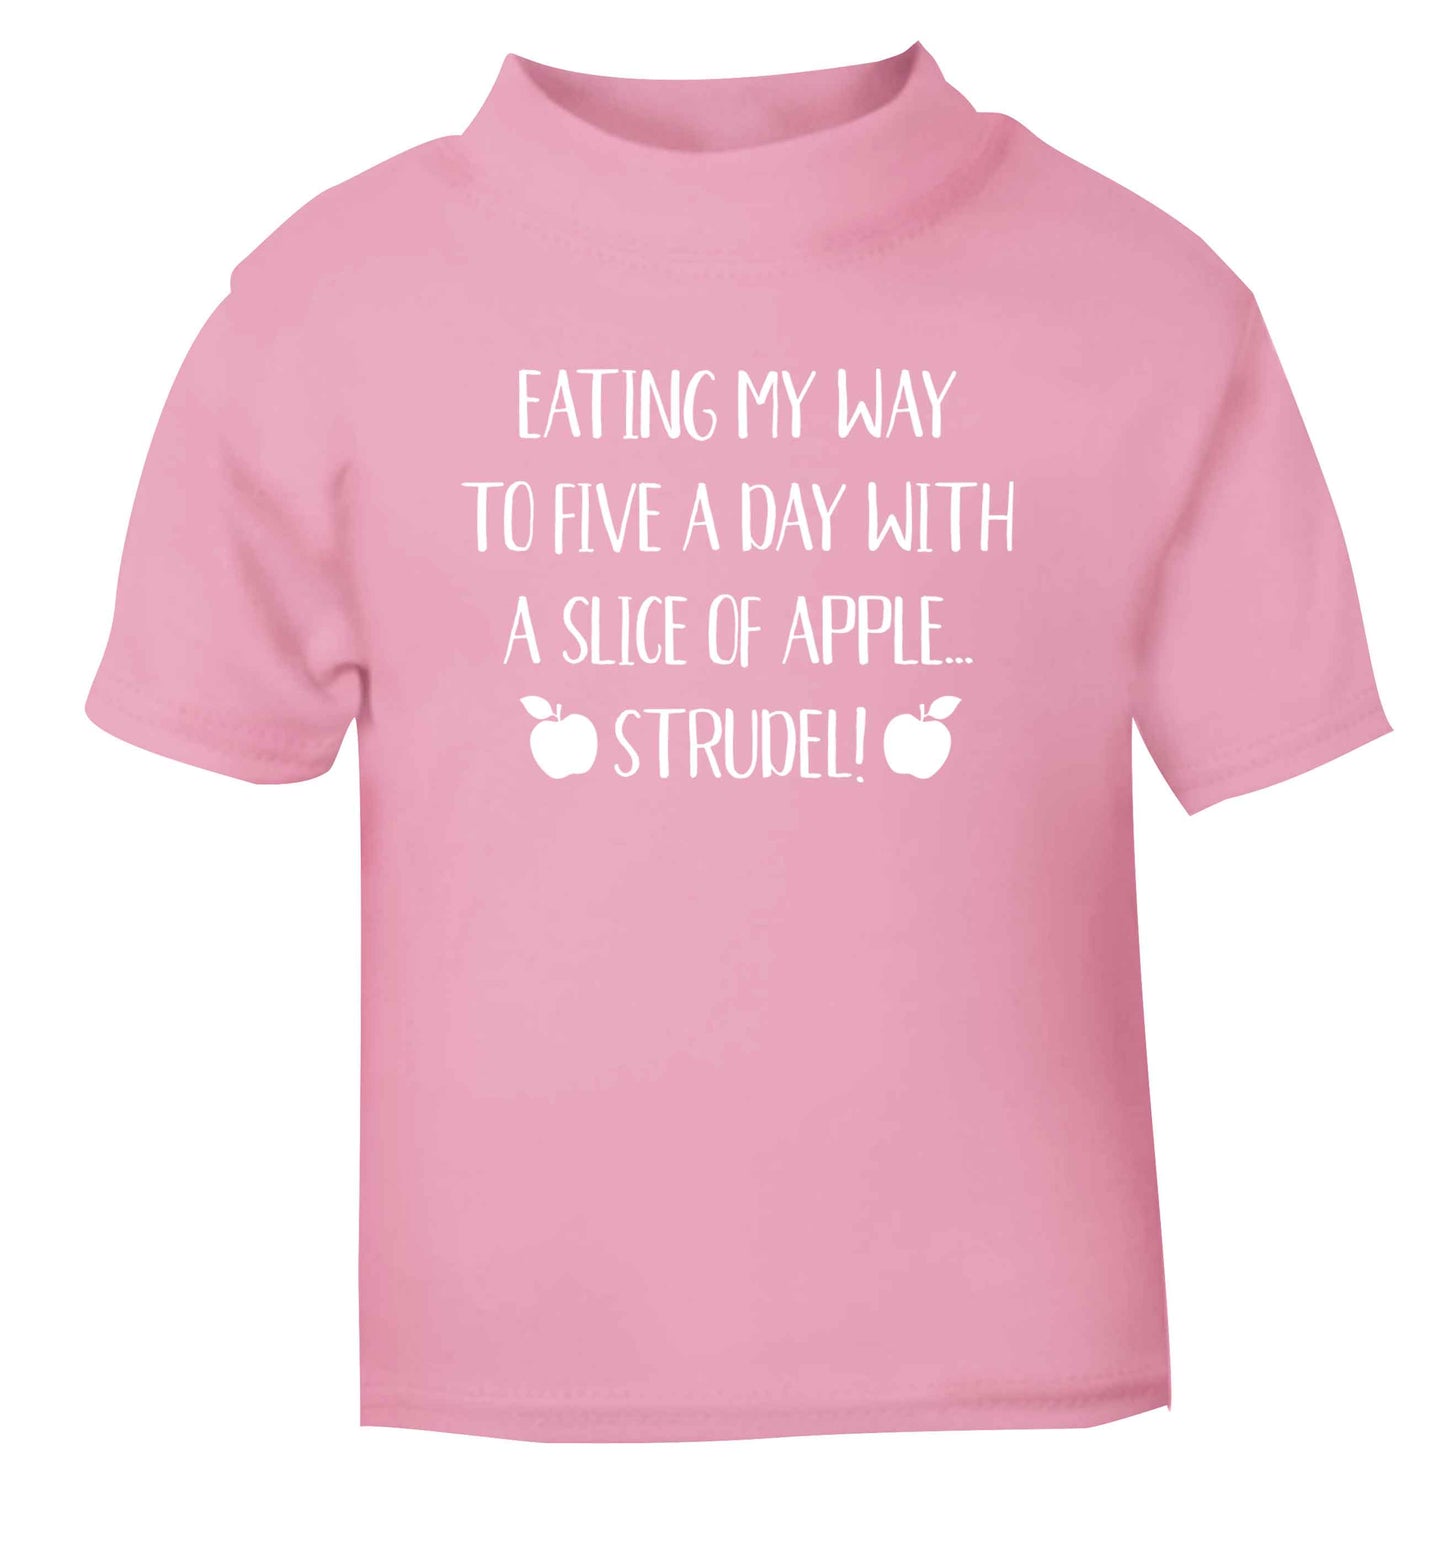 Eating my way to five a day with a slice of apple strudel light pink Baby Toddler Tshirt 2 Years